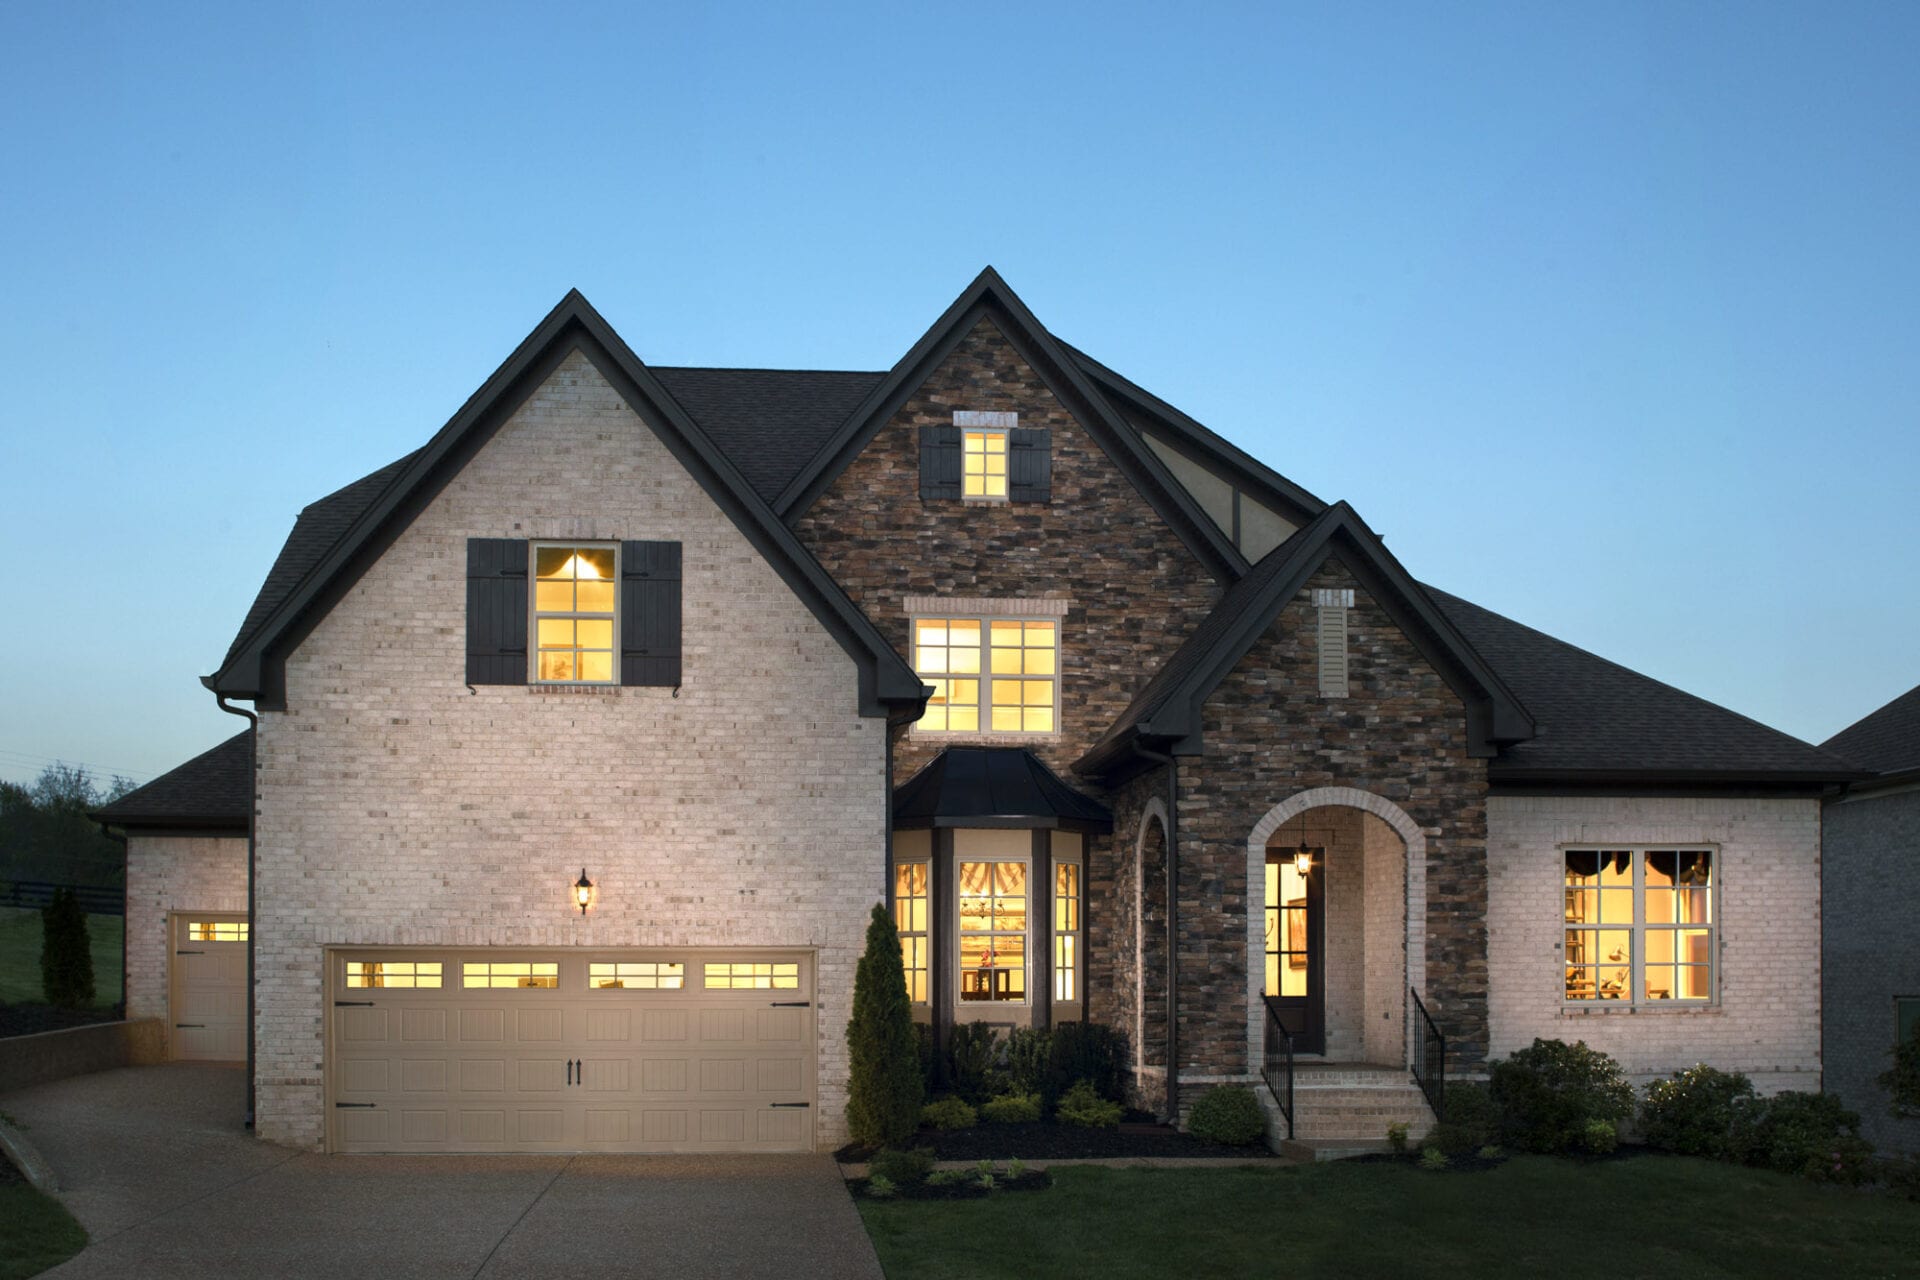 Ranch Style Homes from New Home Builders in Nashville - New Homes for Sale in Still Springs Ridge Community